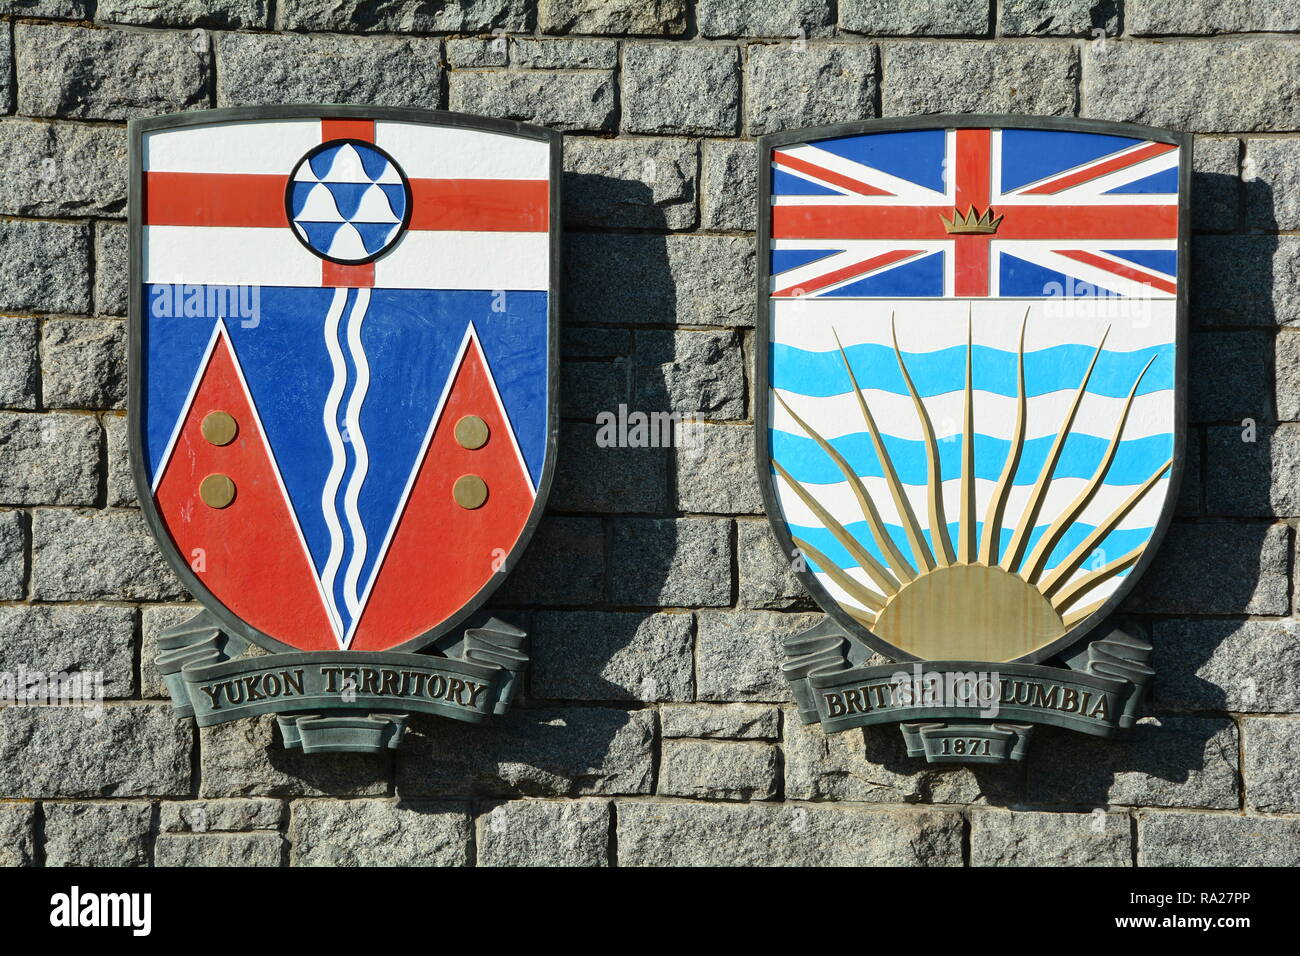 Coats of arms for the Yukon Territory and the province of British Columbia Stock Photo